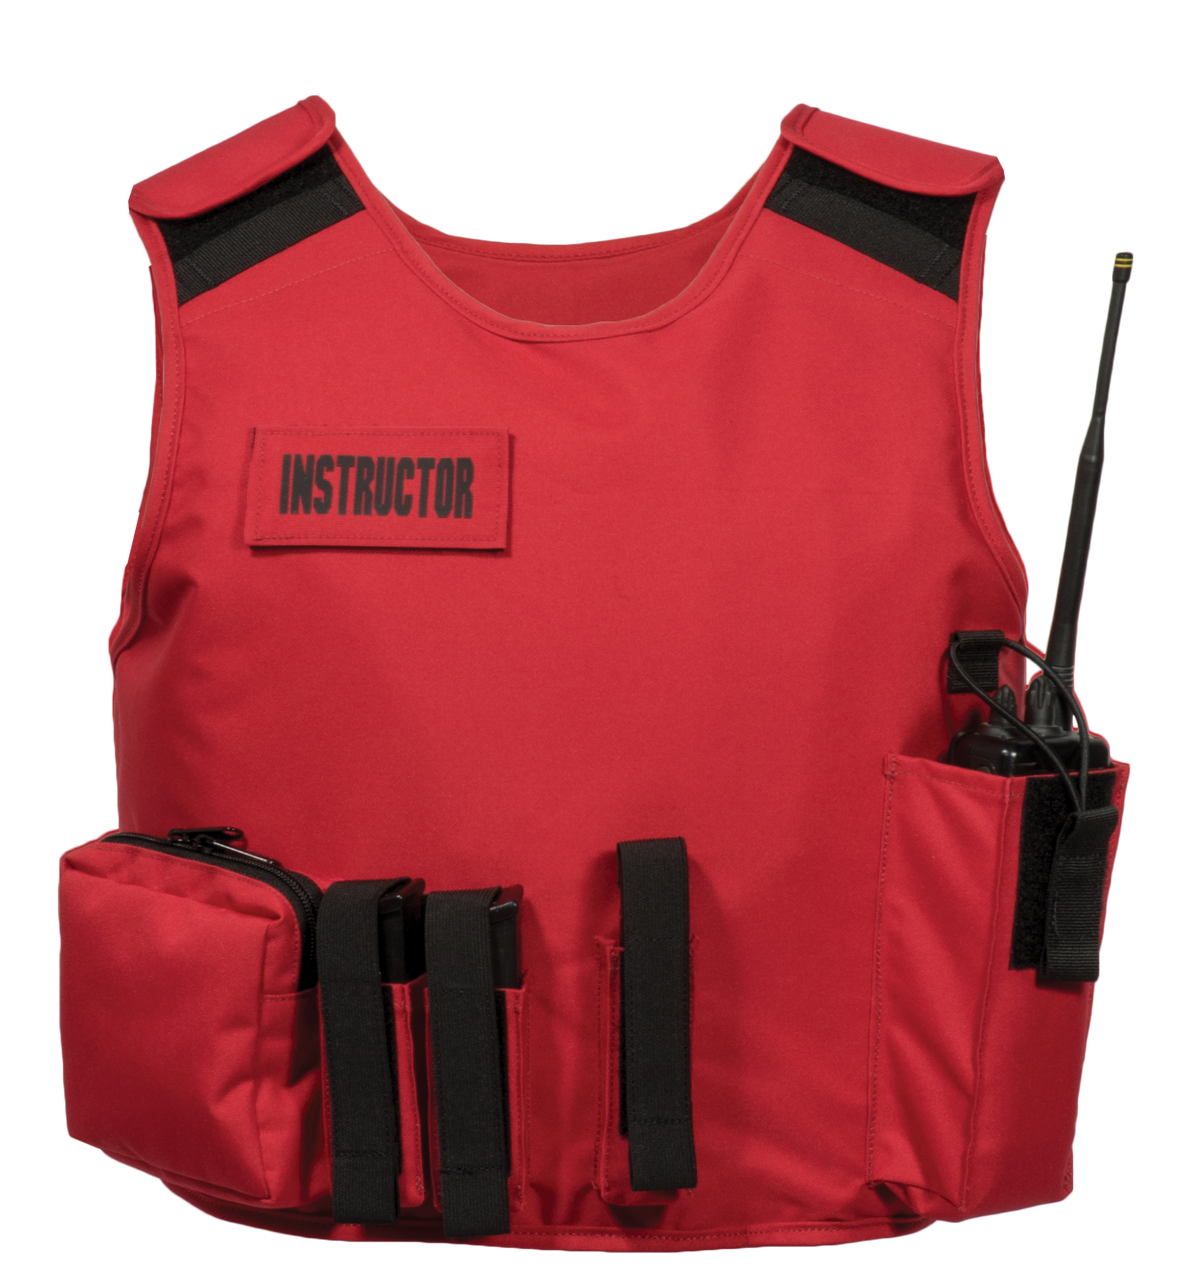 Armor Express OCS Female Overt Ballistic Body Armor Carrier, Choose Carrier only or Carrier and Panels (Soft Armor), NIJ Certified - Level 2, or Level 3A Threat Level, Featuring front hard armor plate pockets accommodating inserts or rifle plate pr